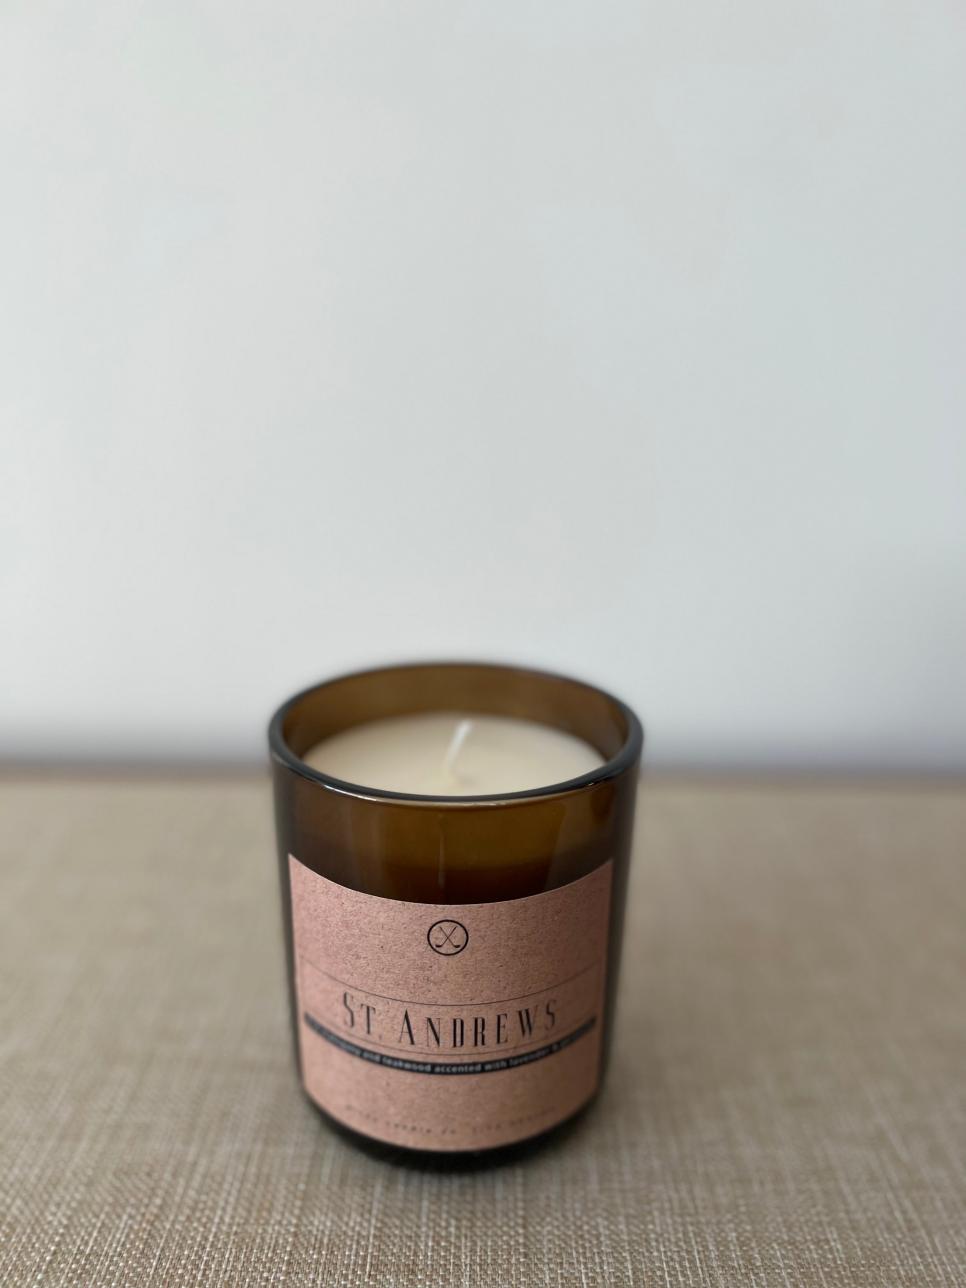 rx-wickswicks-candle-co-st-andrews-luxury-candle.jpeg